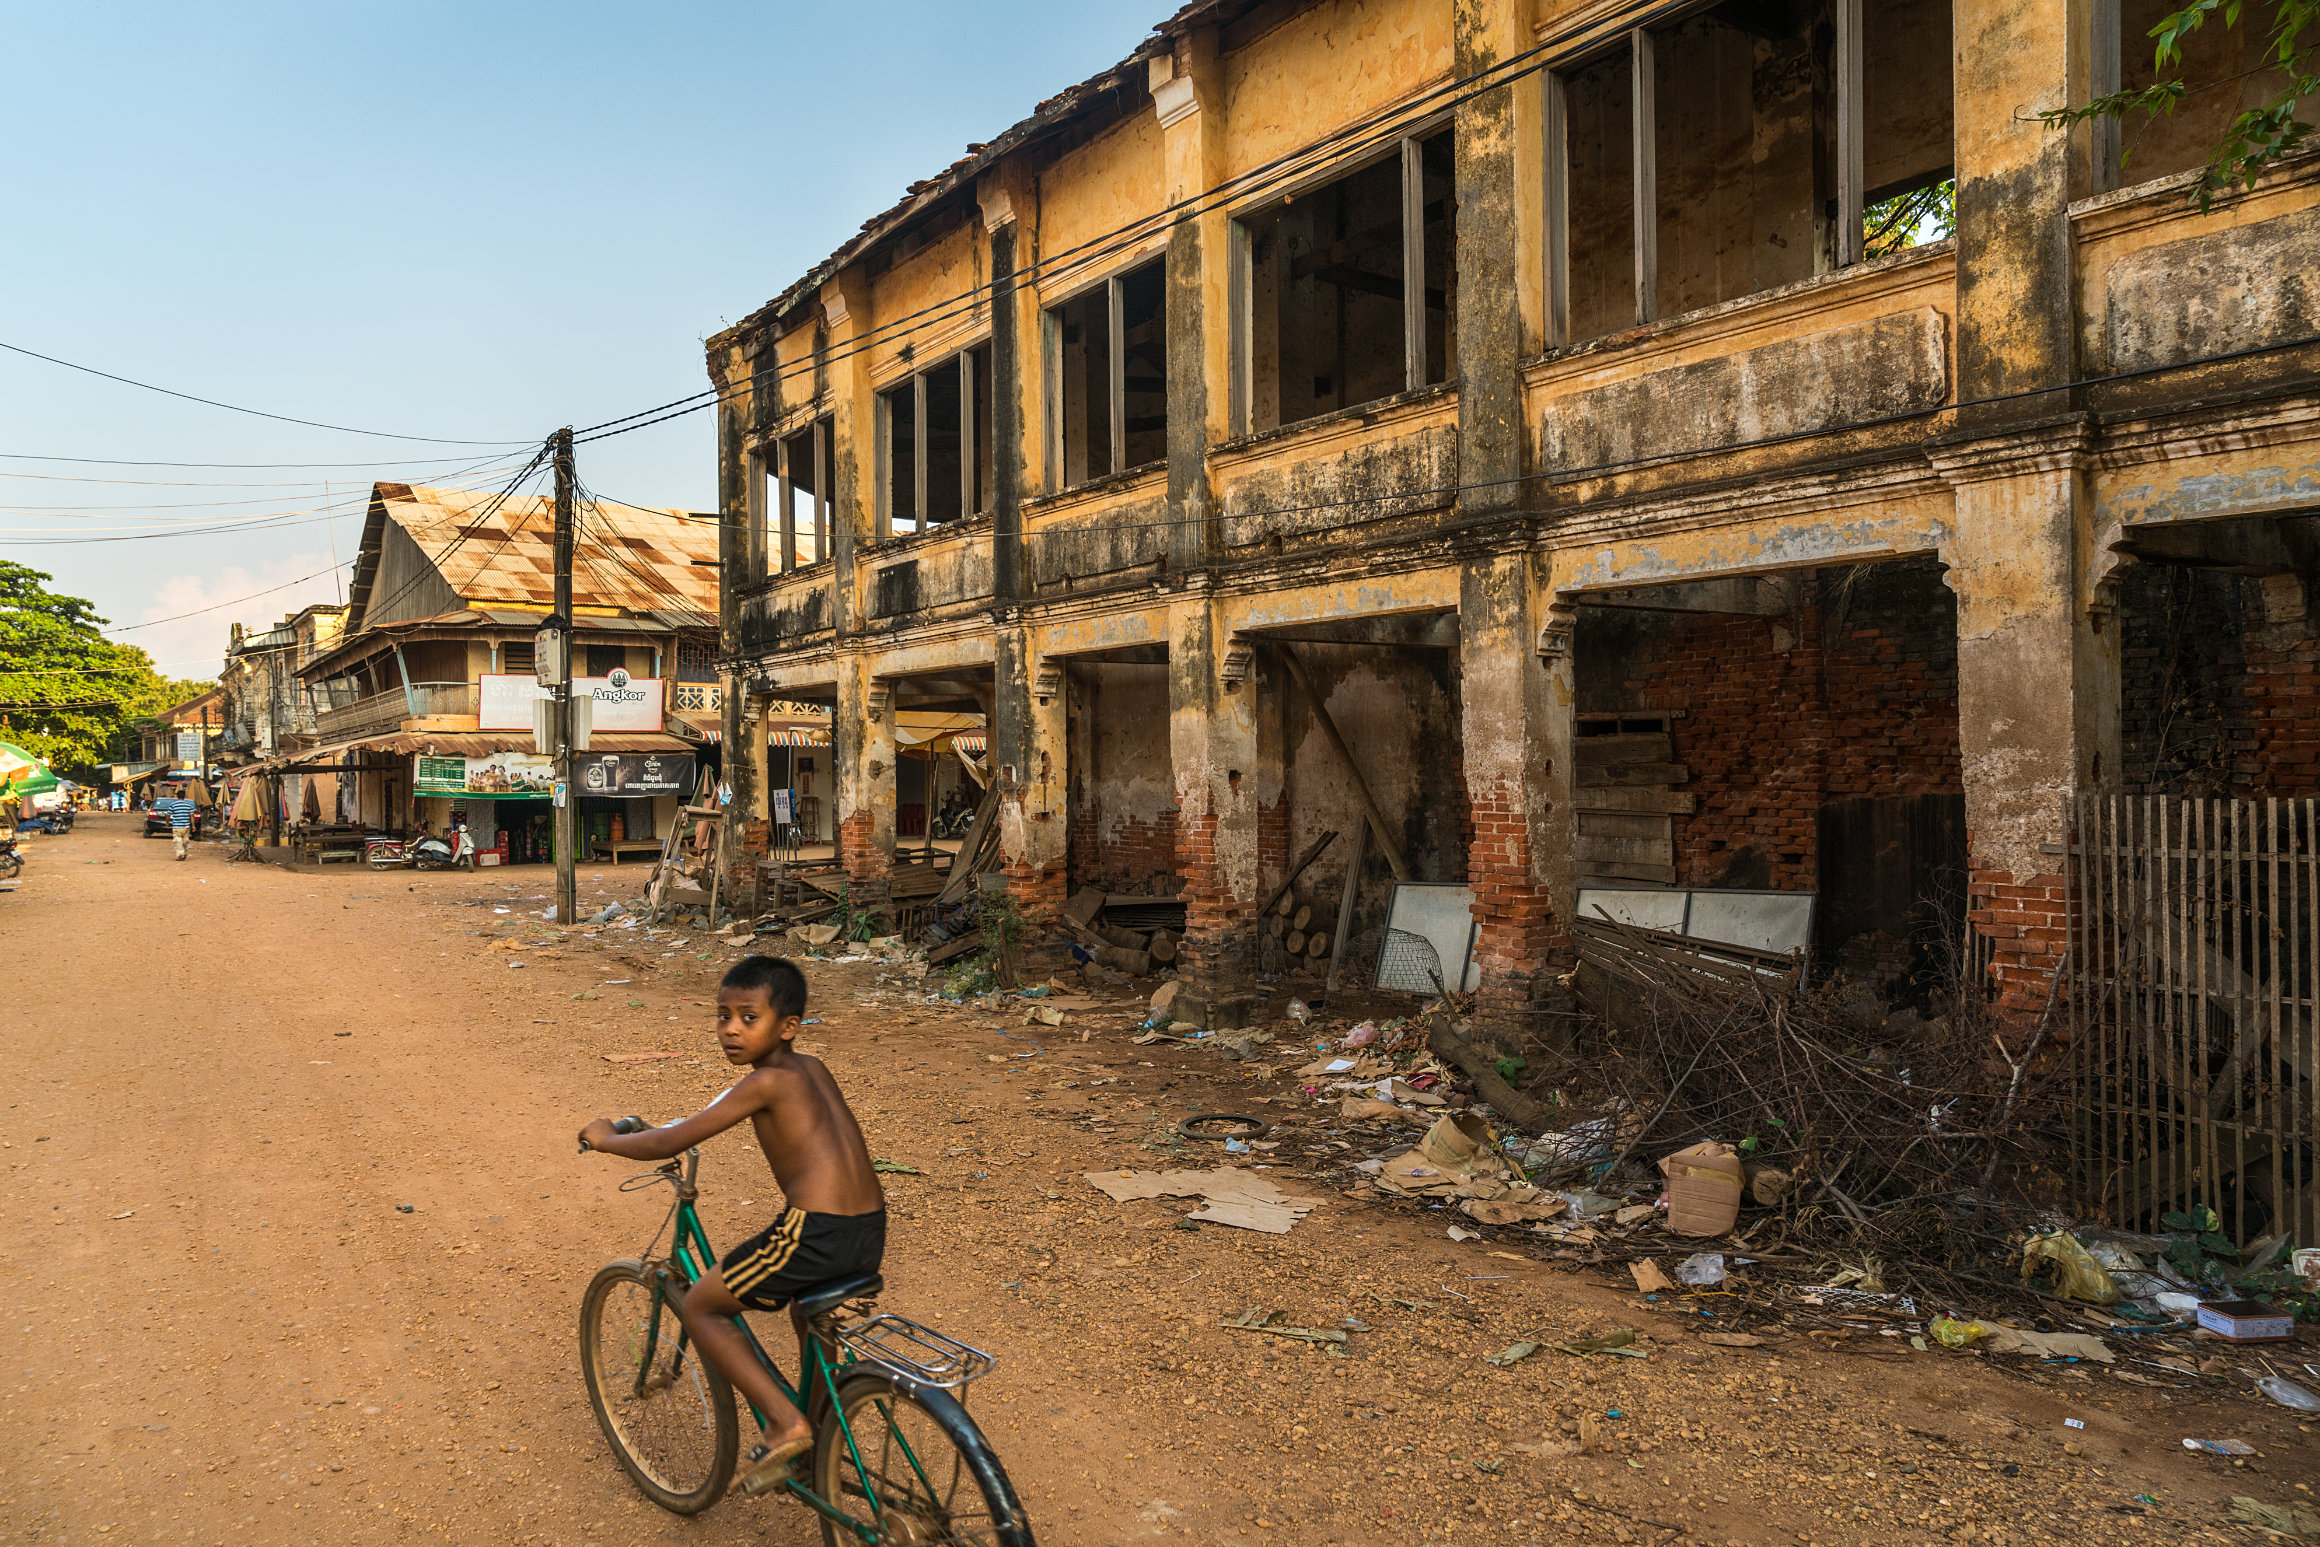 Kid on bike and crumbling old colonial buildings in Chhlong town, Kratie province, Cambodia